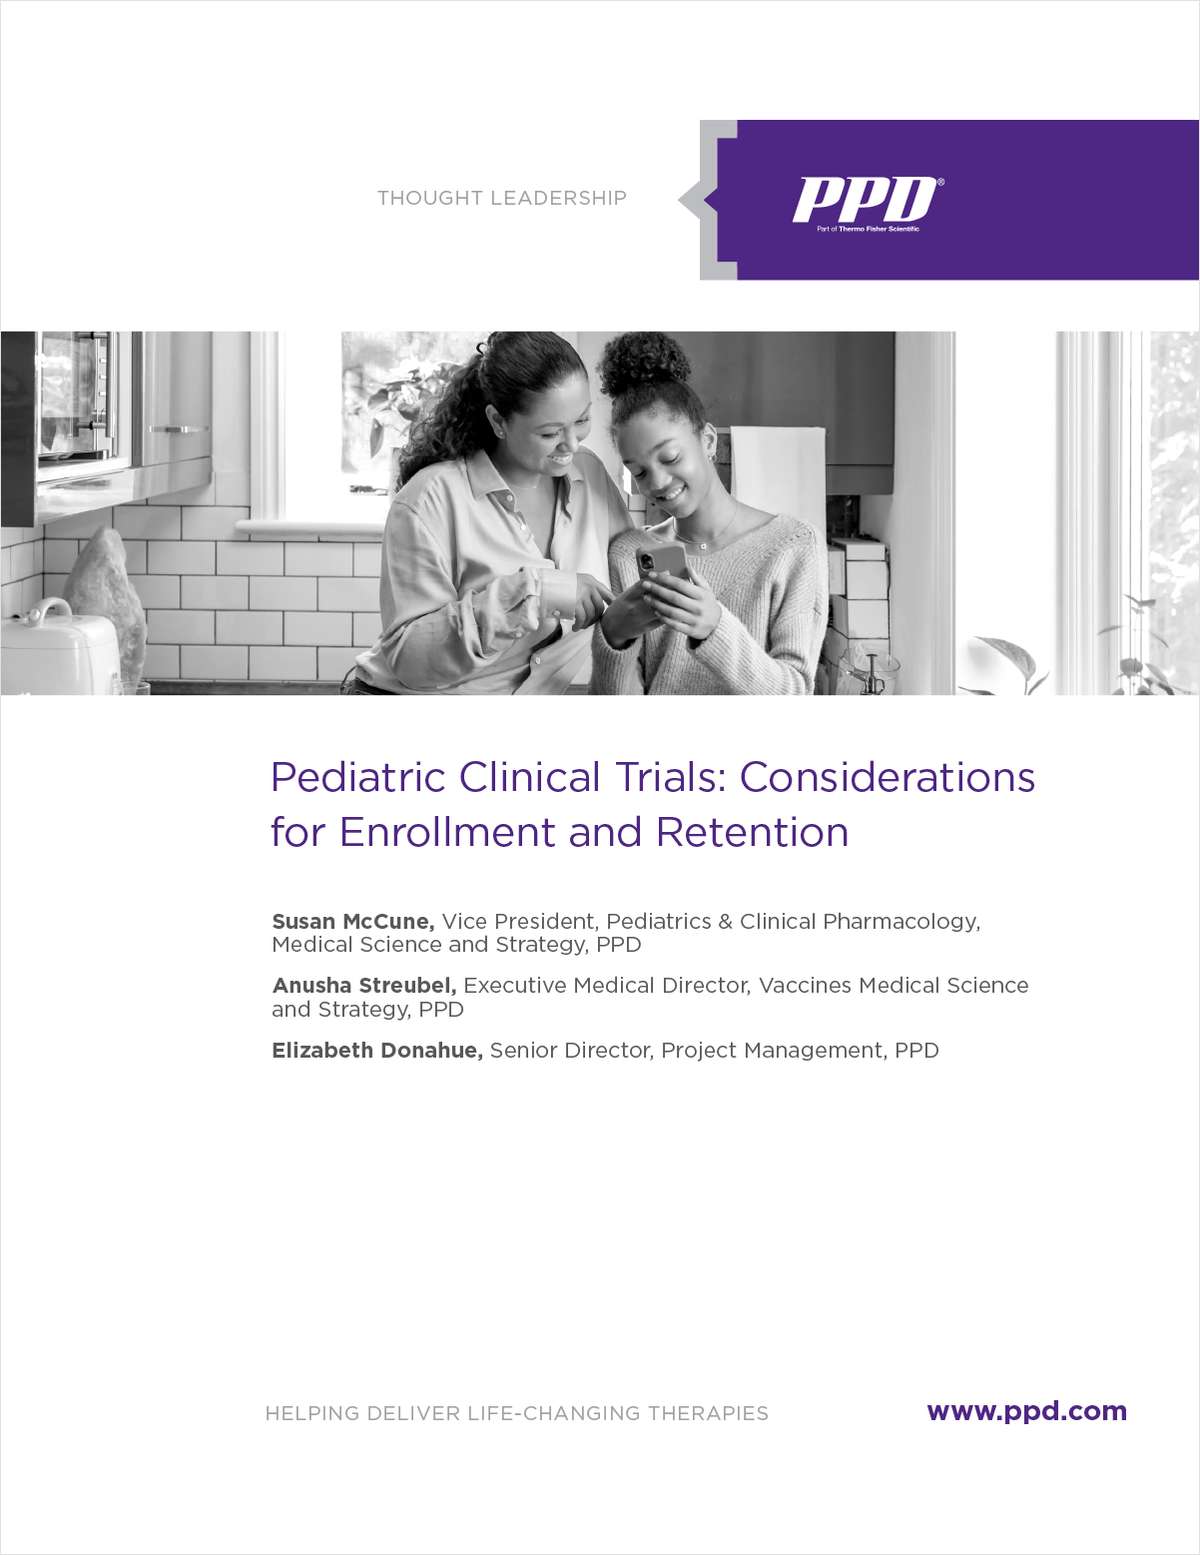 Pediatric Clinical Trials: Considerations for Enrollment and Retention